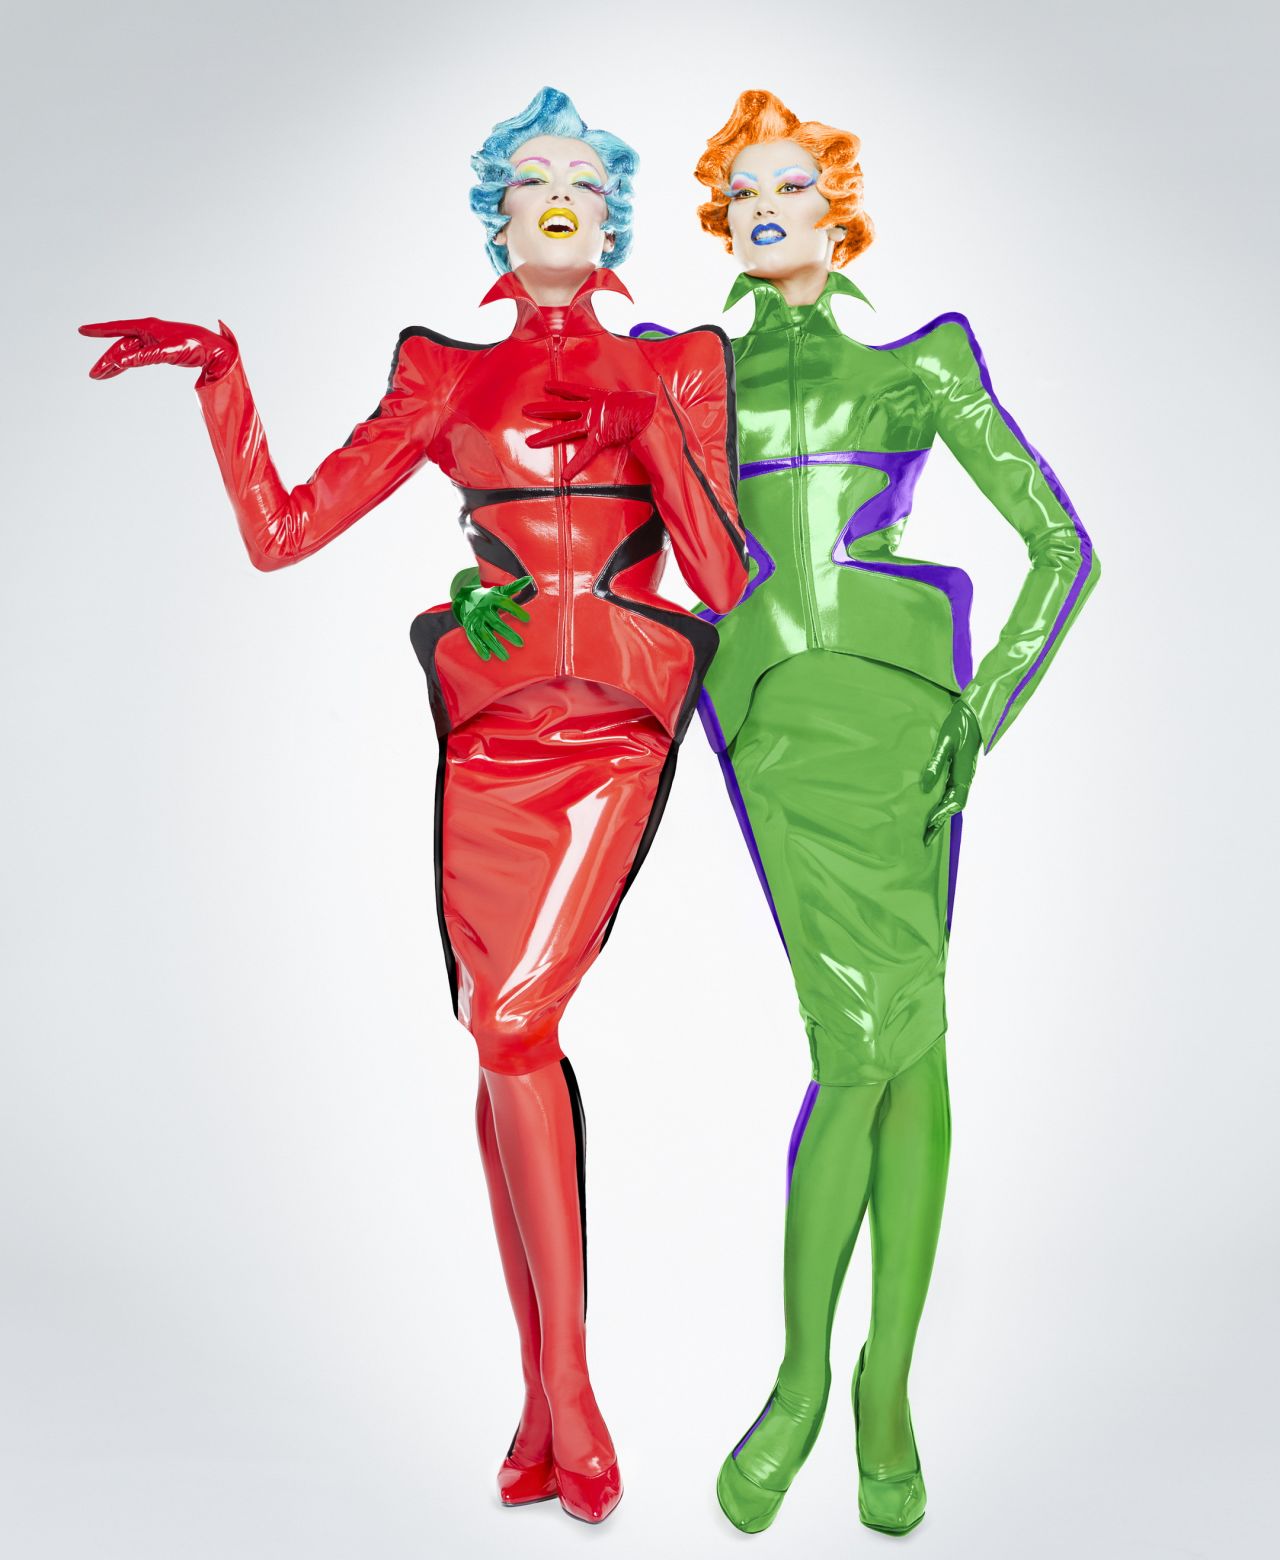 Stage costumes from the 2013 stage show "Mugler Follies."